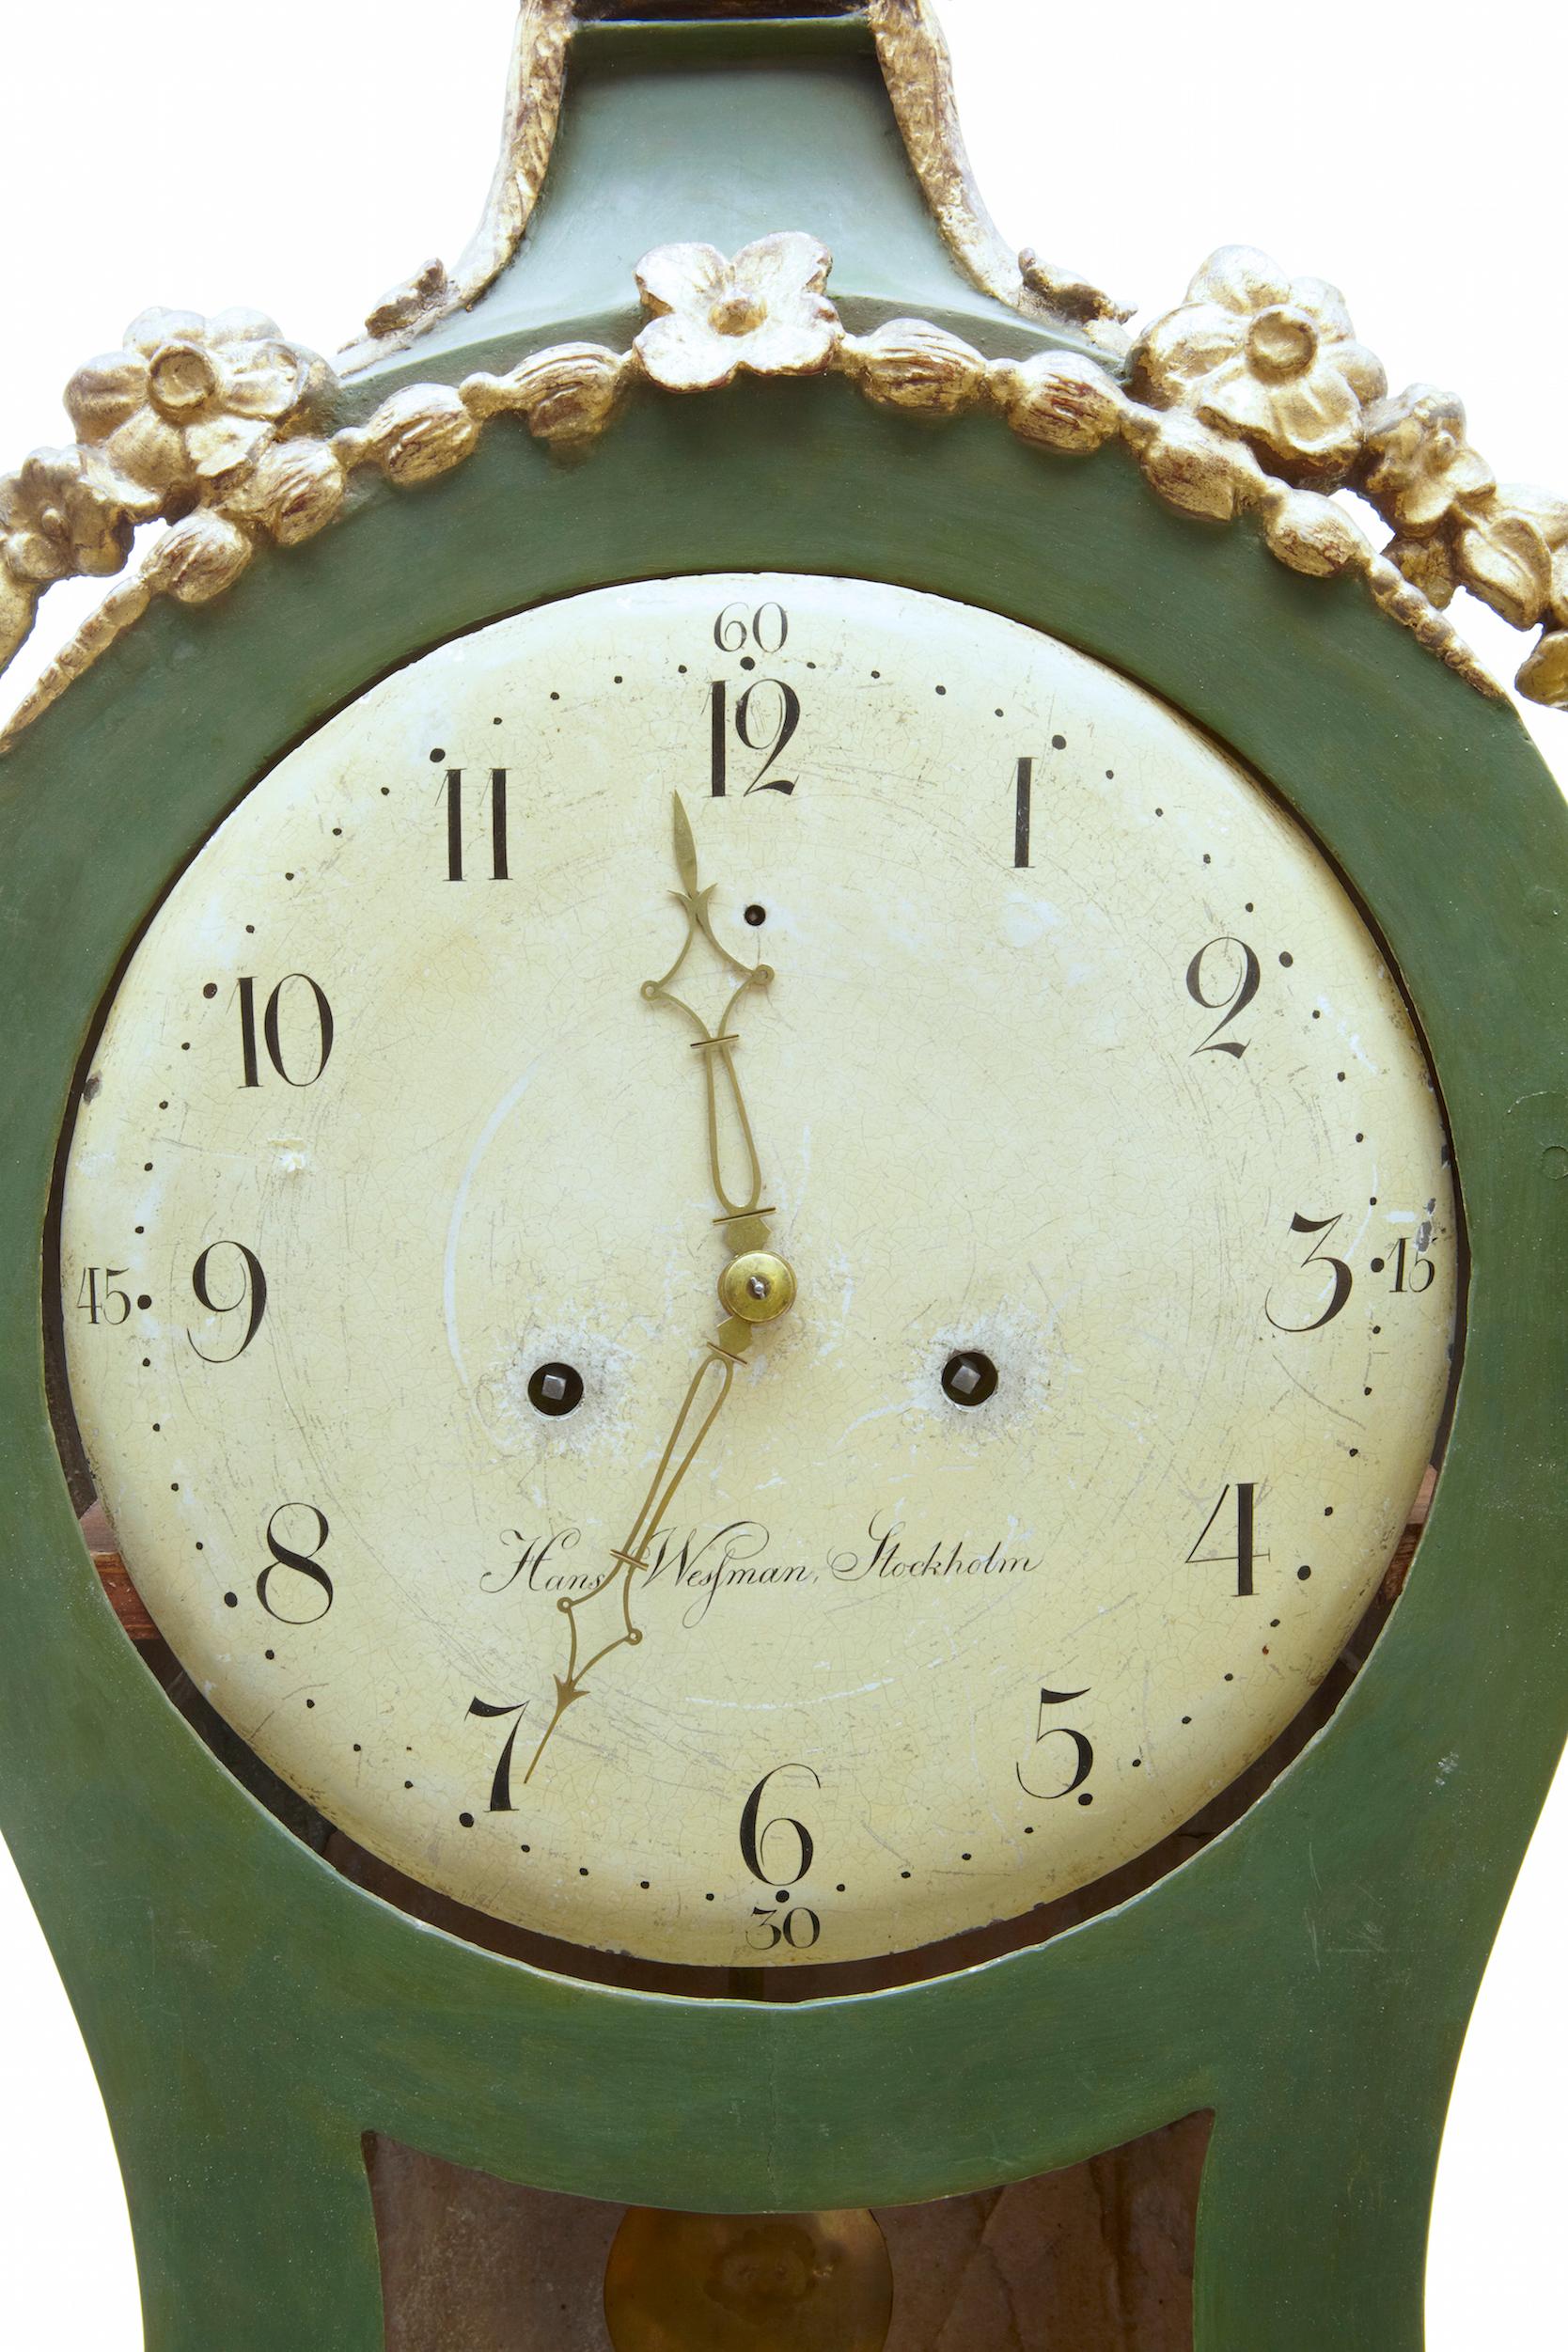 18th century Swedish gilt and painted mantle clock, circa 1790.

Fine quality Swedish clock in original condition. Original green paint with gilt carved wood decoration, a real fine quality piece. Clock face signed Hans Westman,